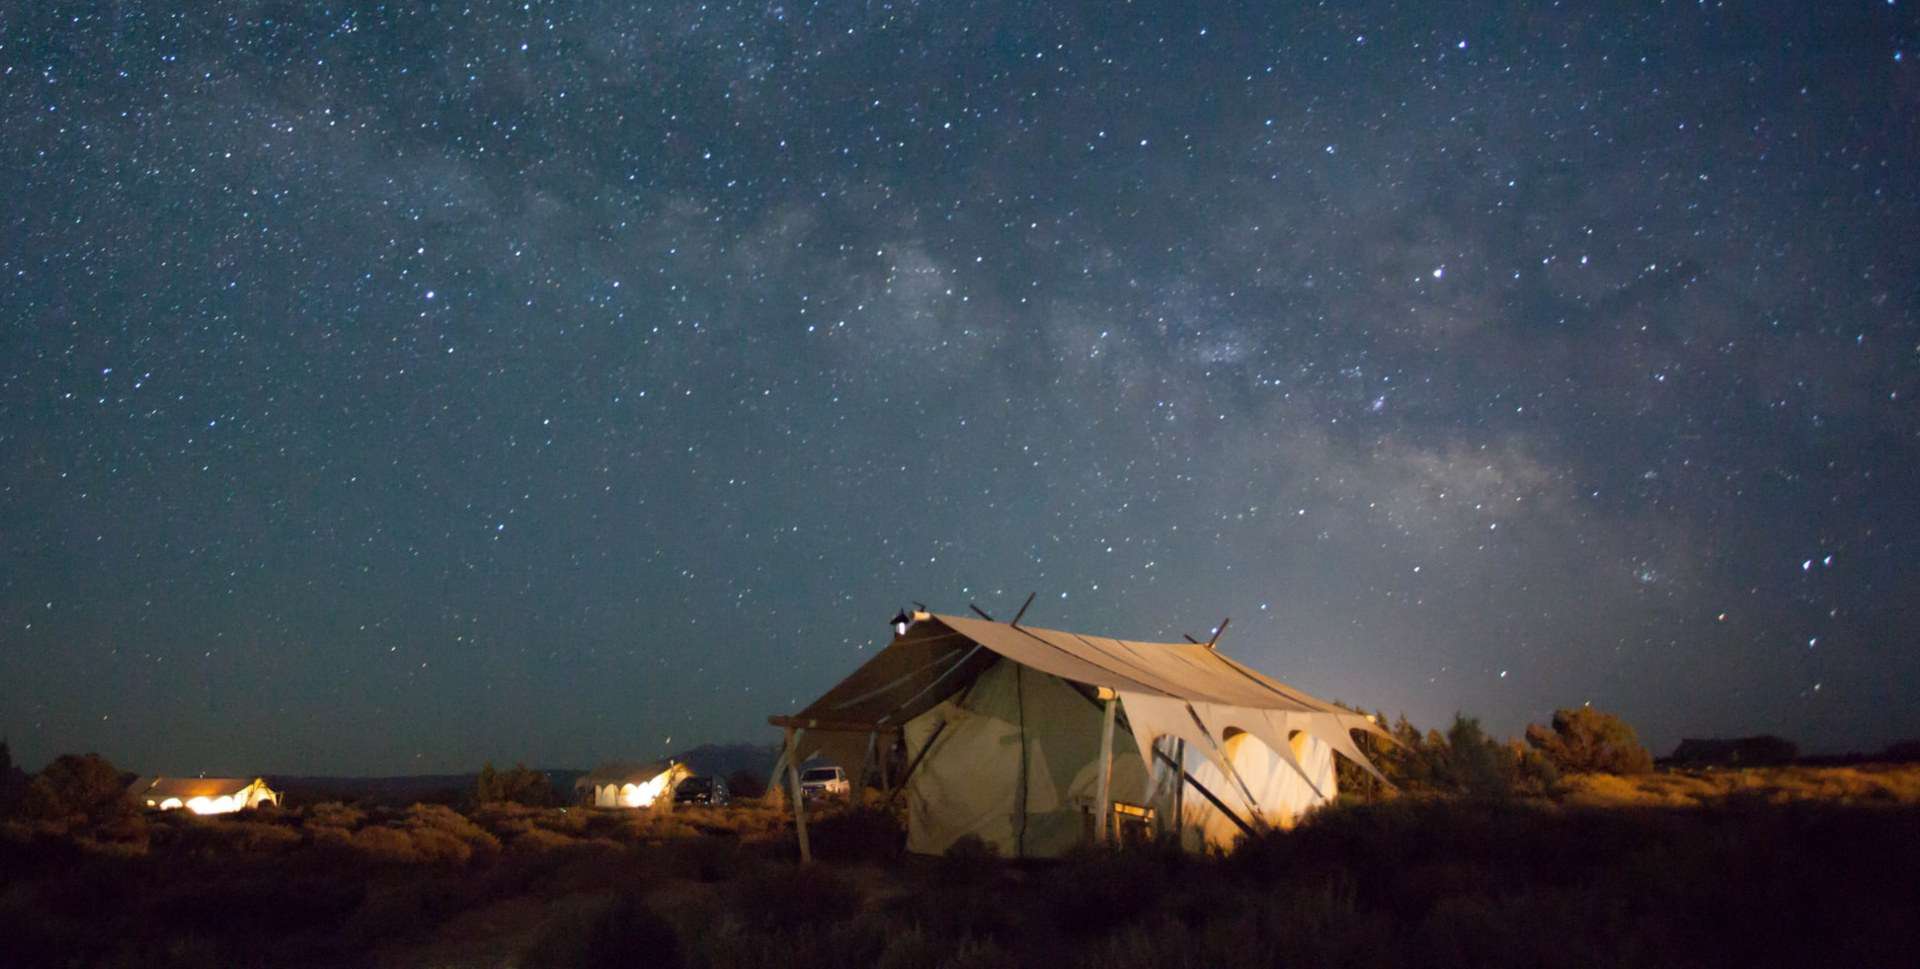 Wall tent set up in scrub land under a starry sky at night.